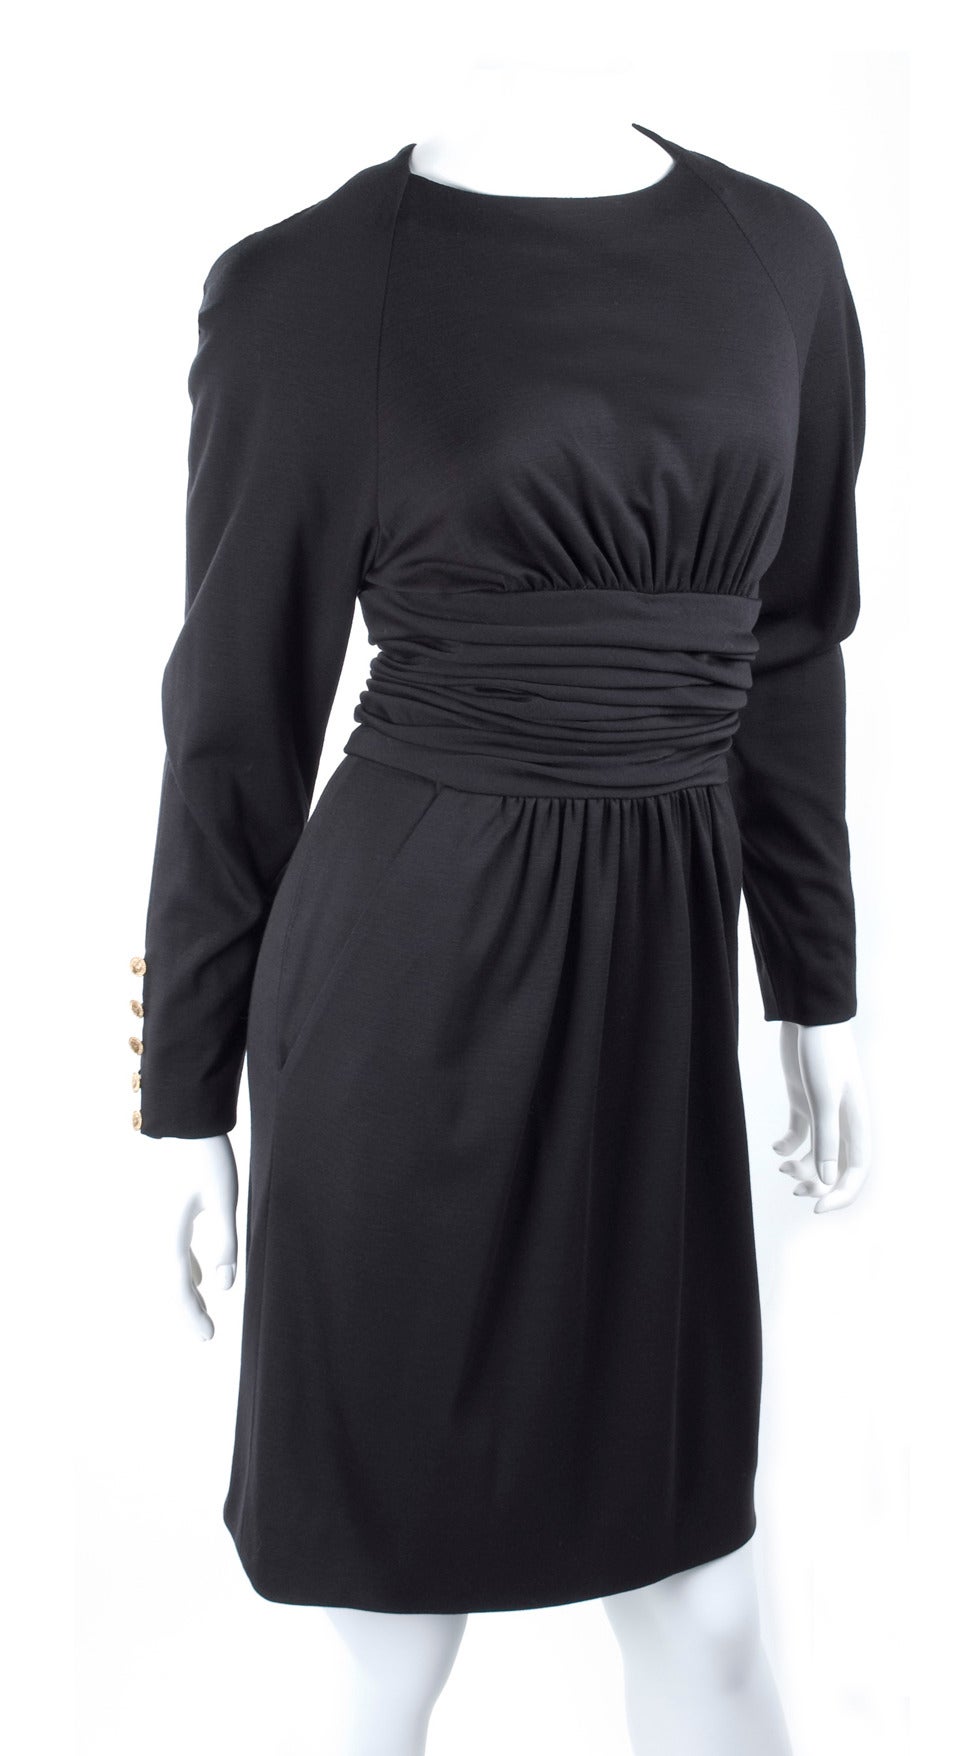 Women's 1987 Chanel Boutique Dress with 